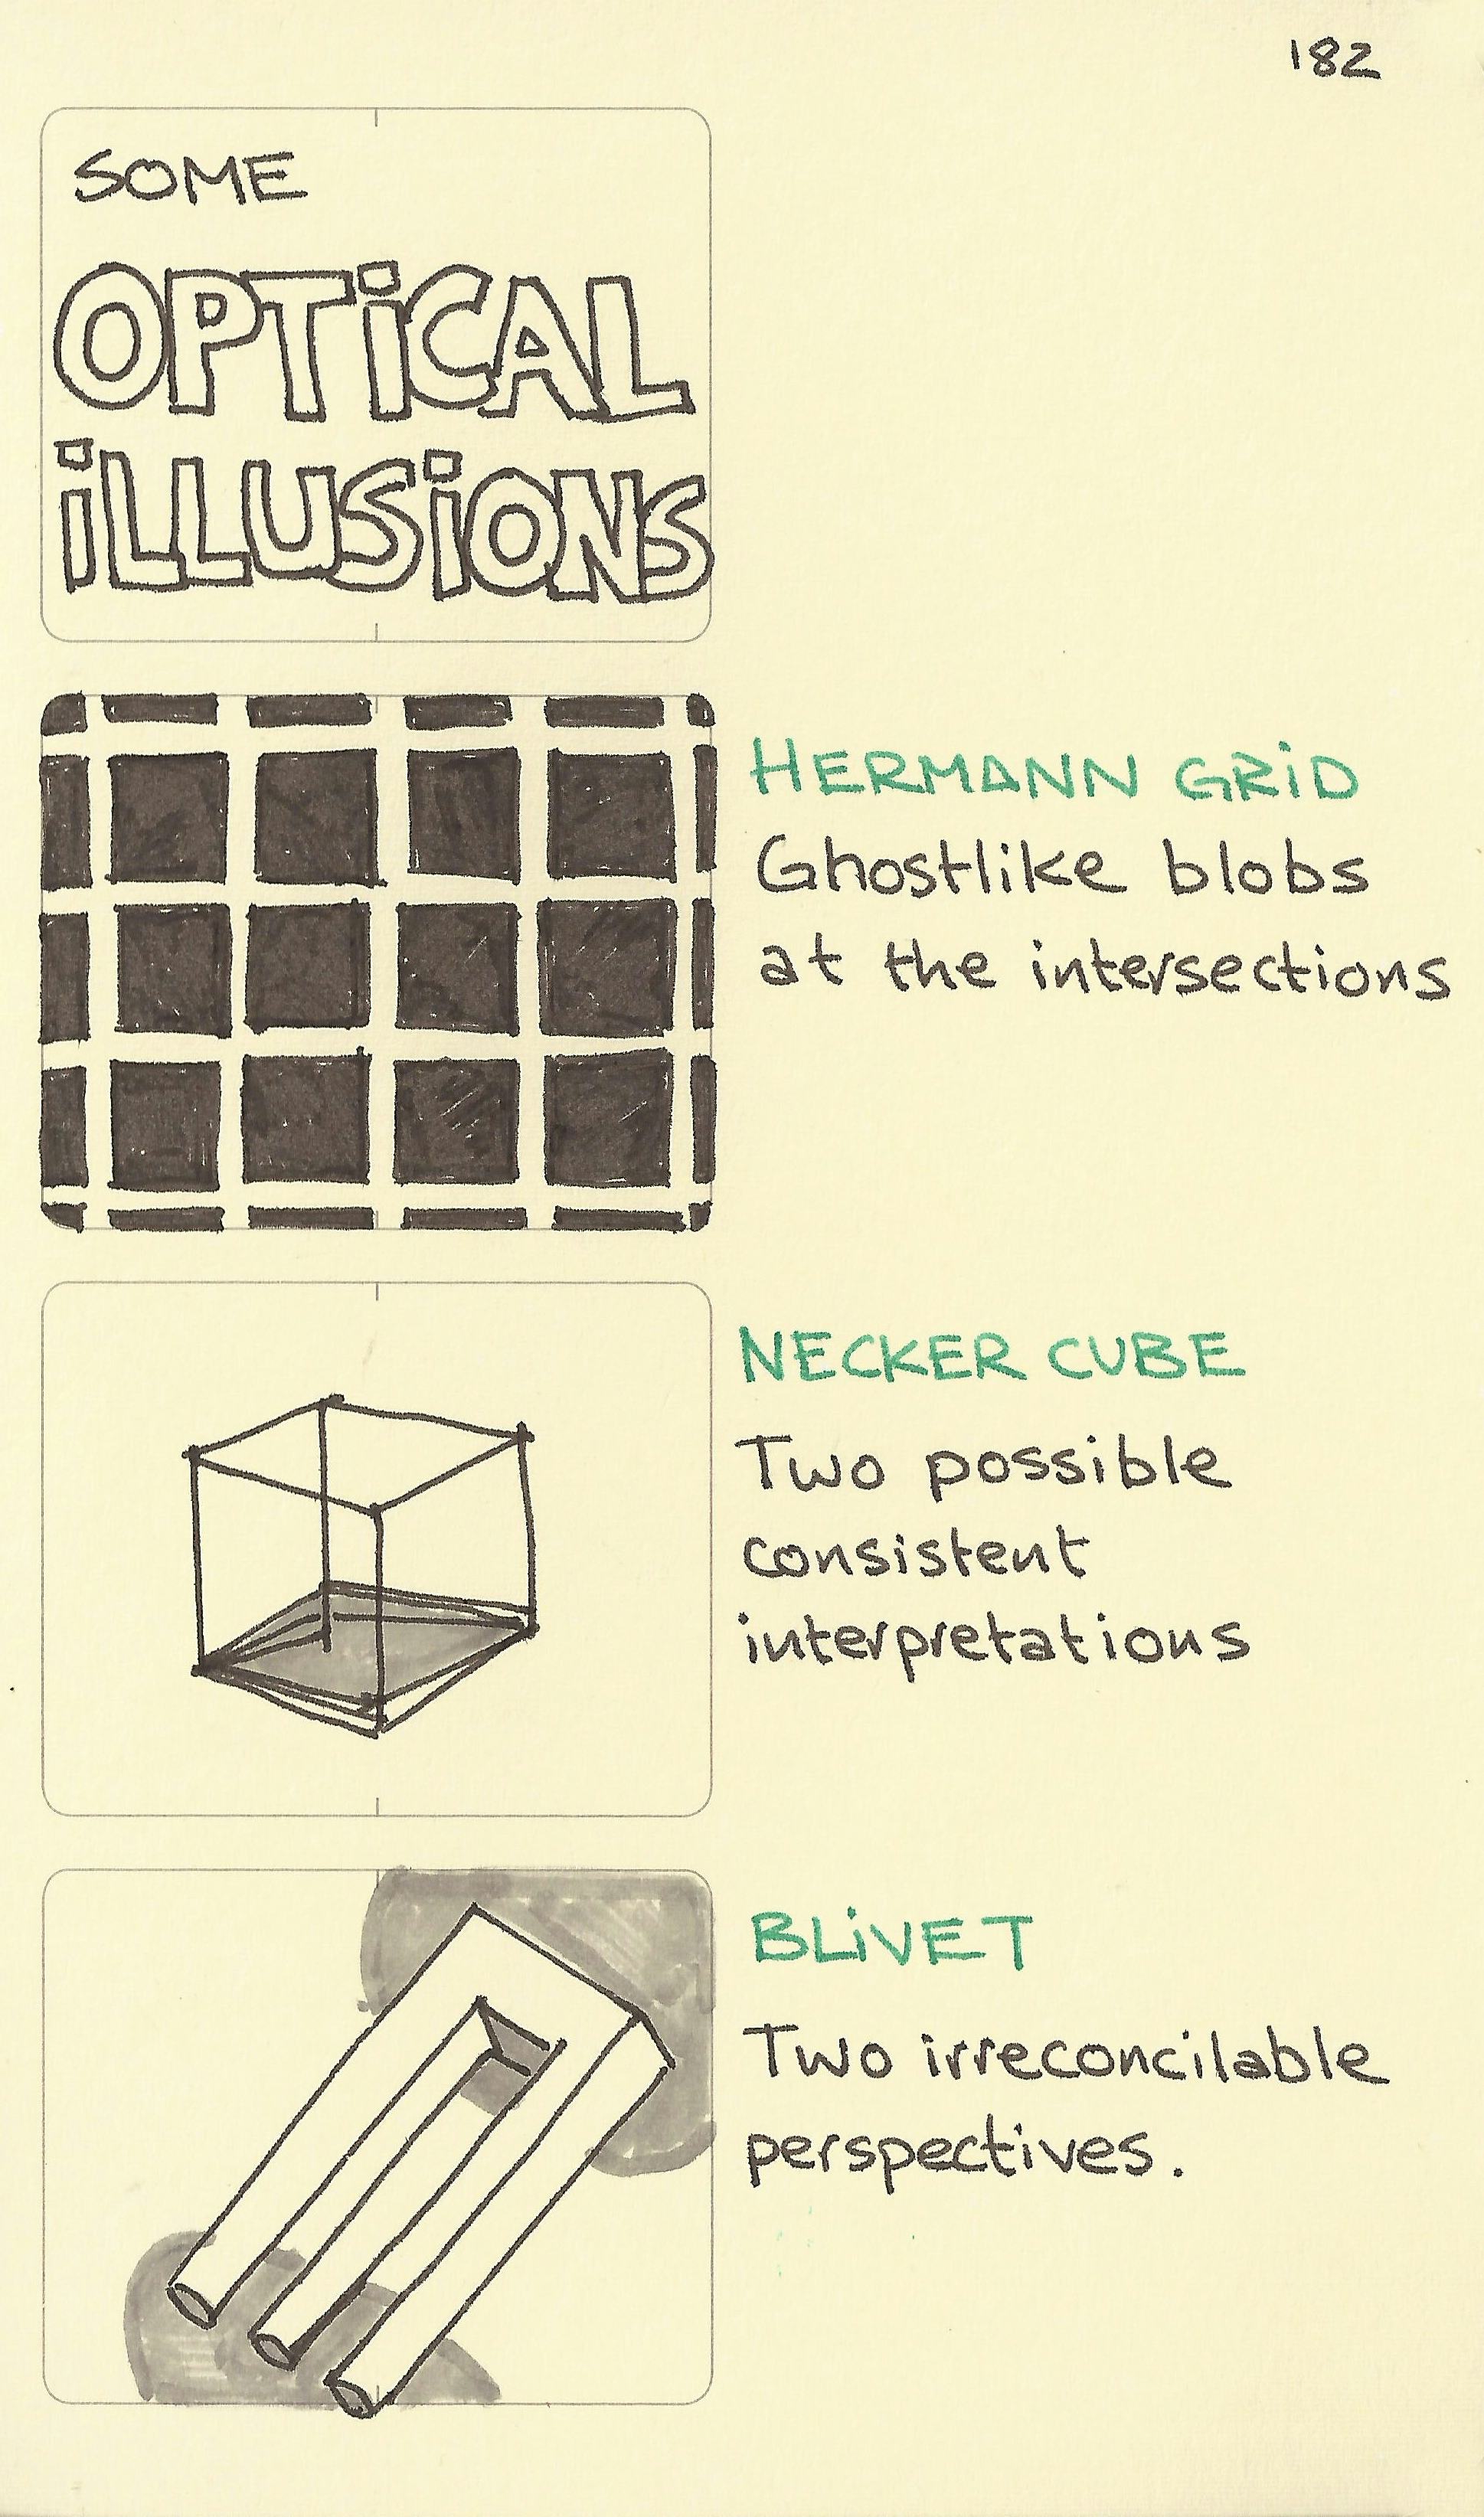 Some optical illusions - Sketchplanations